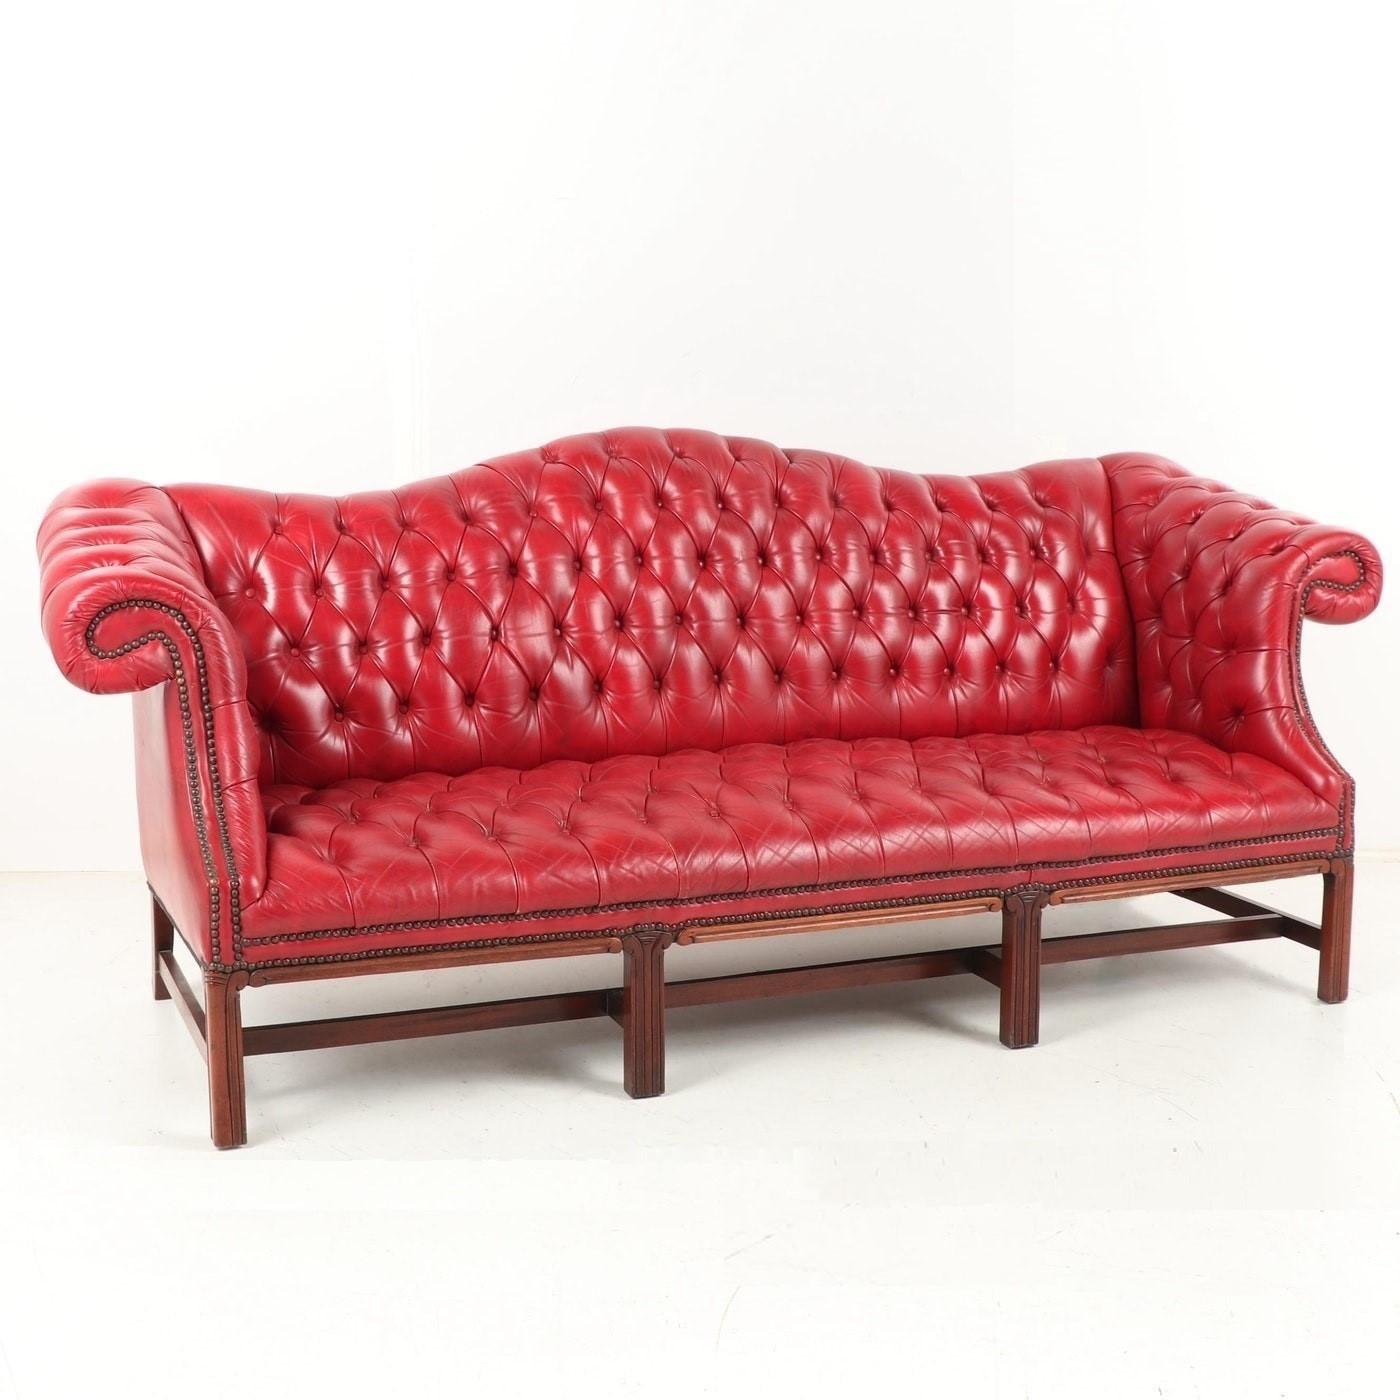 Camel back sofa in the Chippendale style with Marlborough fluted front legs braced with the sabre rear legs through stretchers. The leather is red, supple and deeply buttoned, finished with closely nailed brass studs at the edges. The proportions of